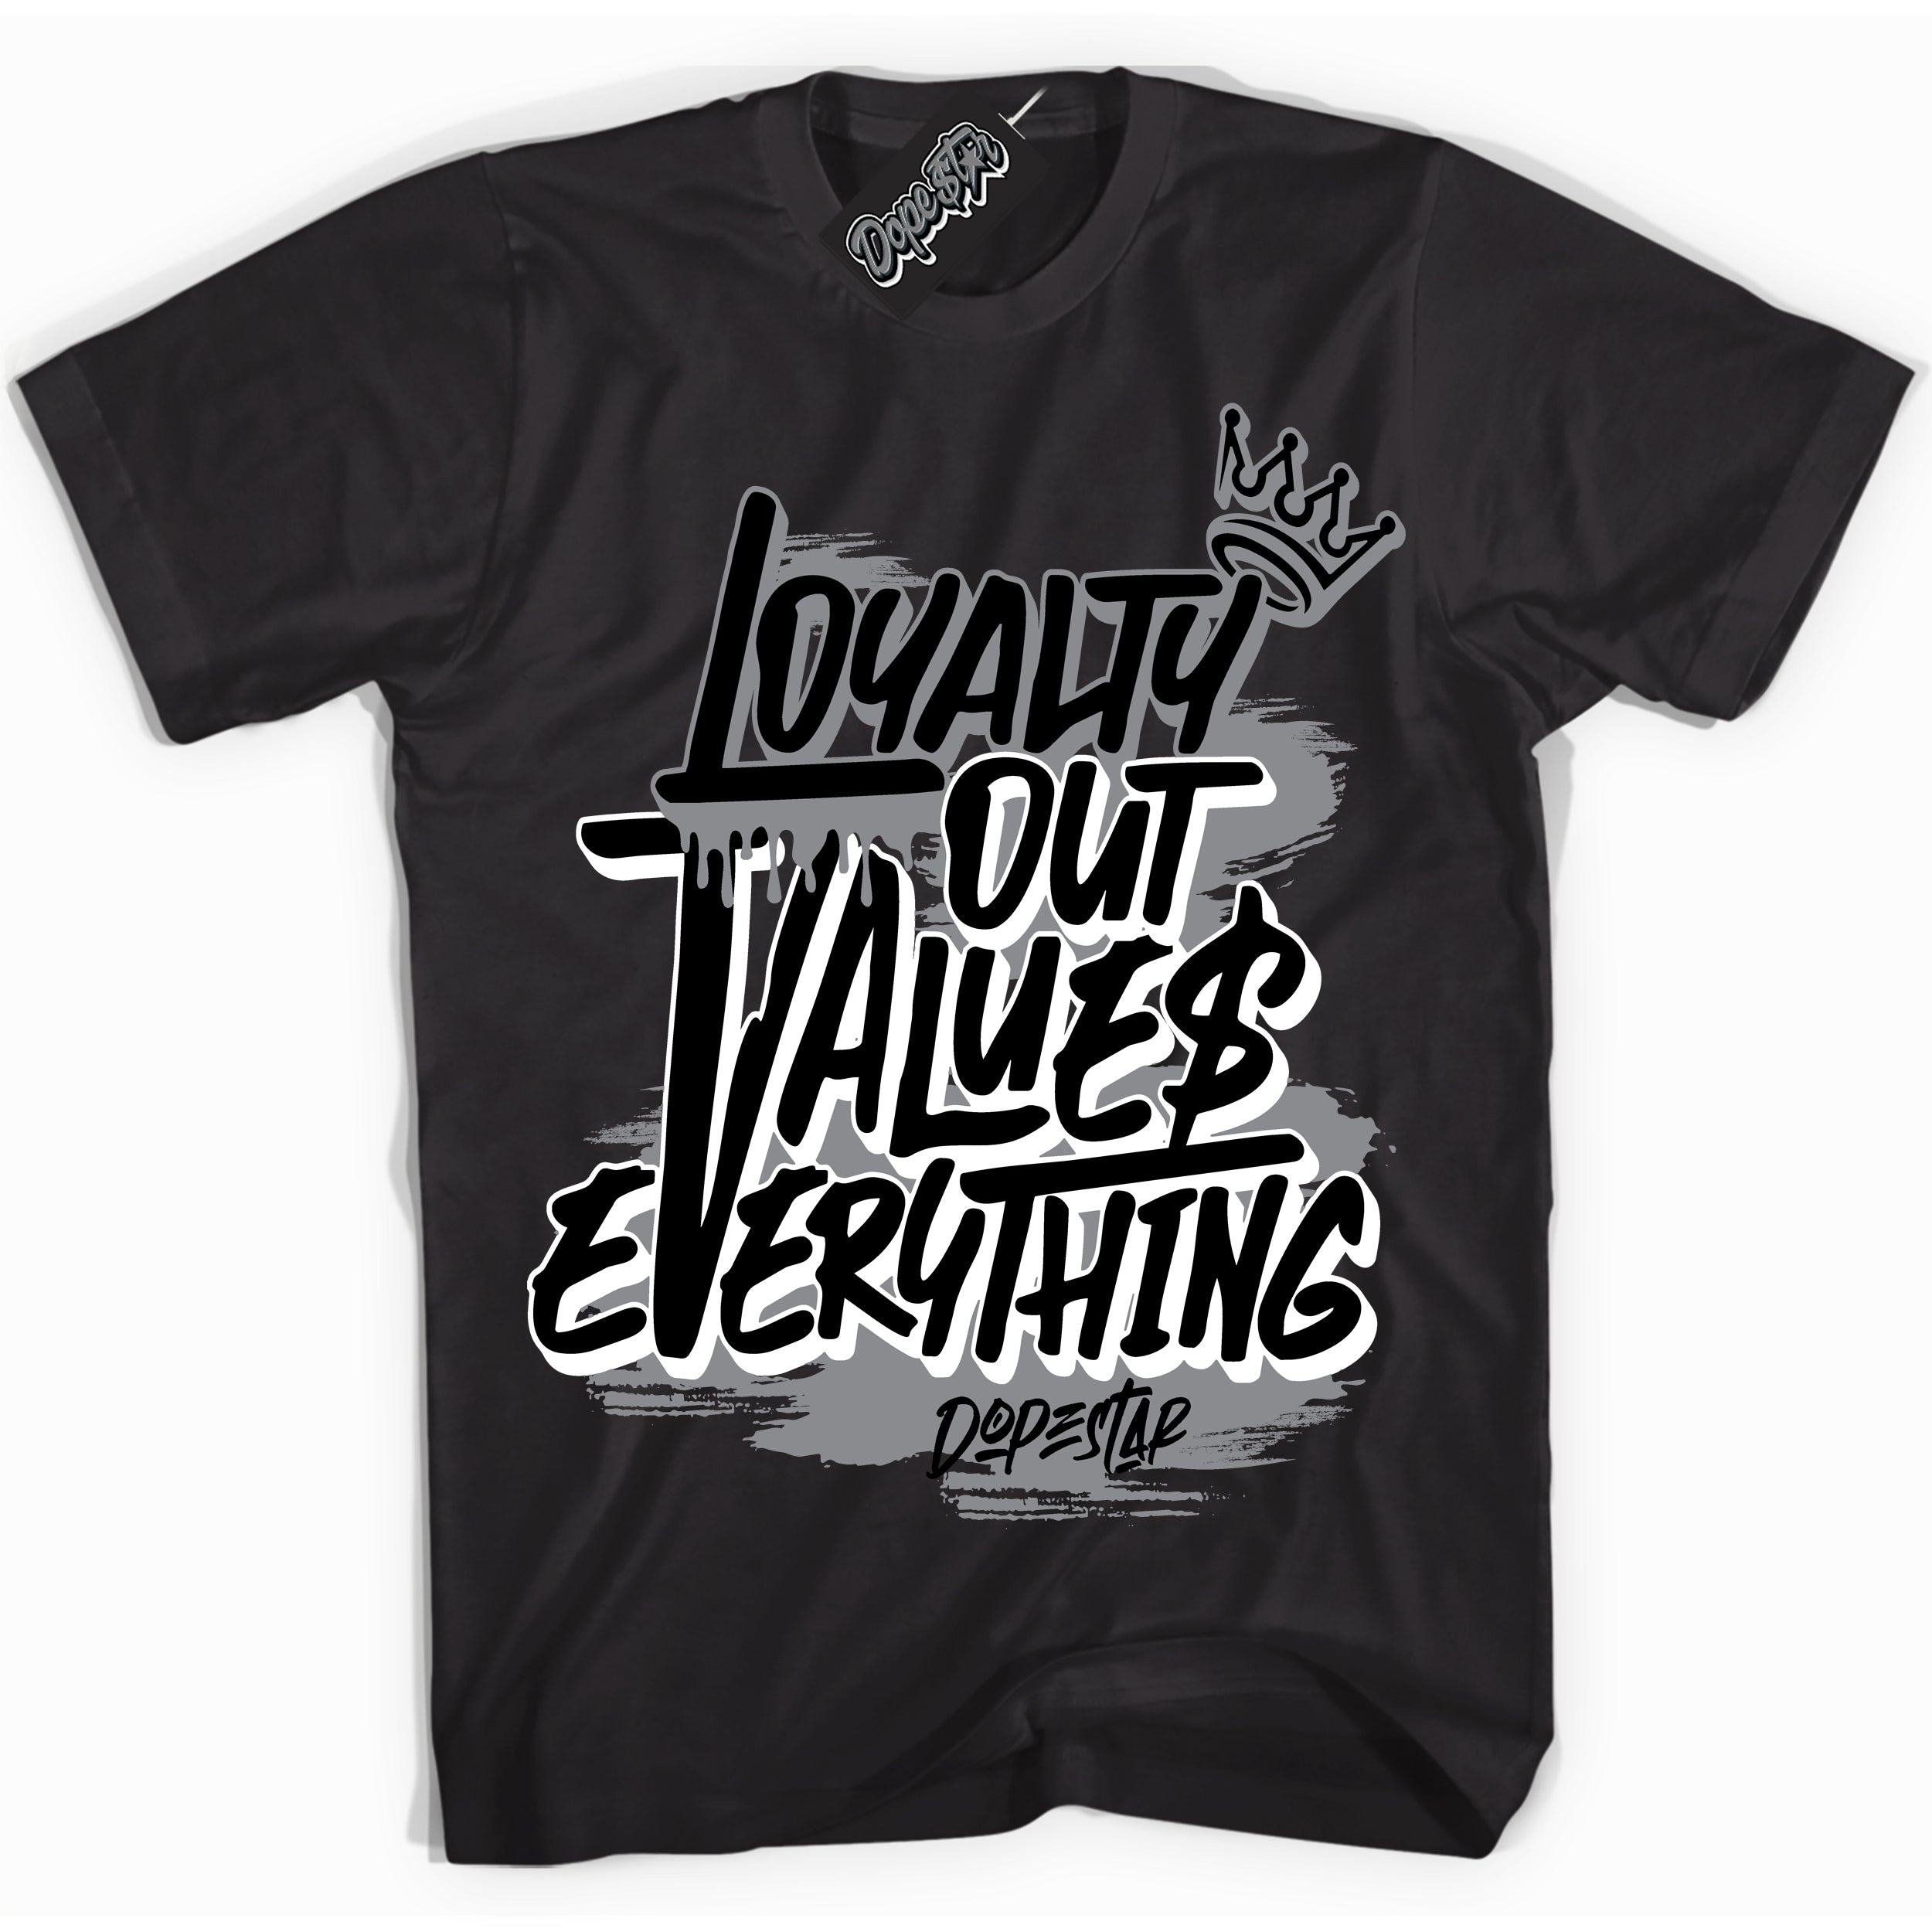 Cool Black Shirt with “ Loyalty Out Values Everything” design that perfectly matches SE Black Canvas 4s Sneakers.